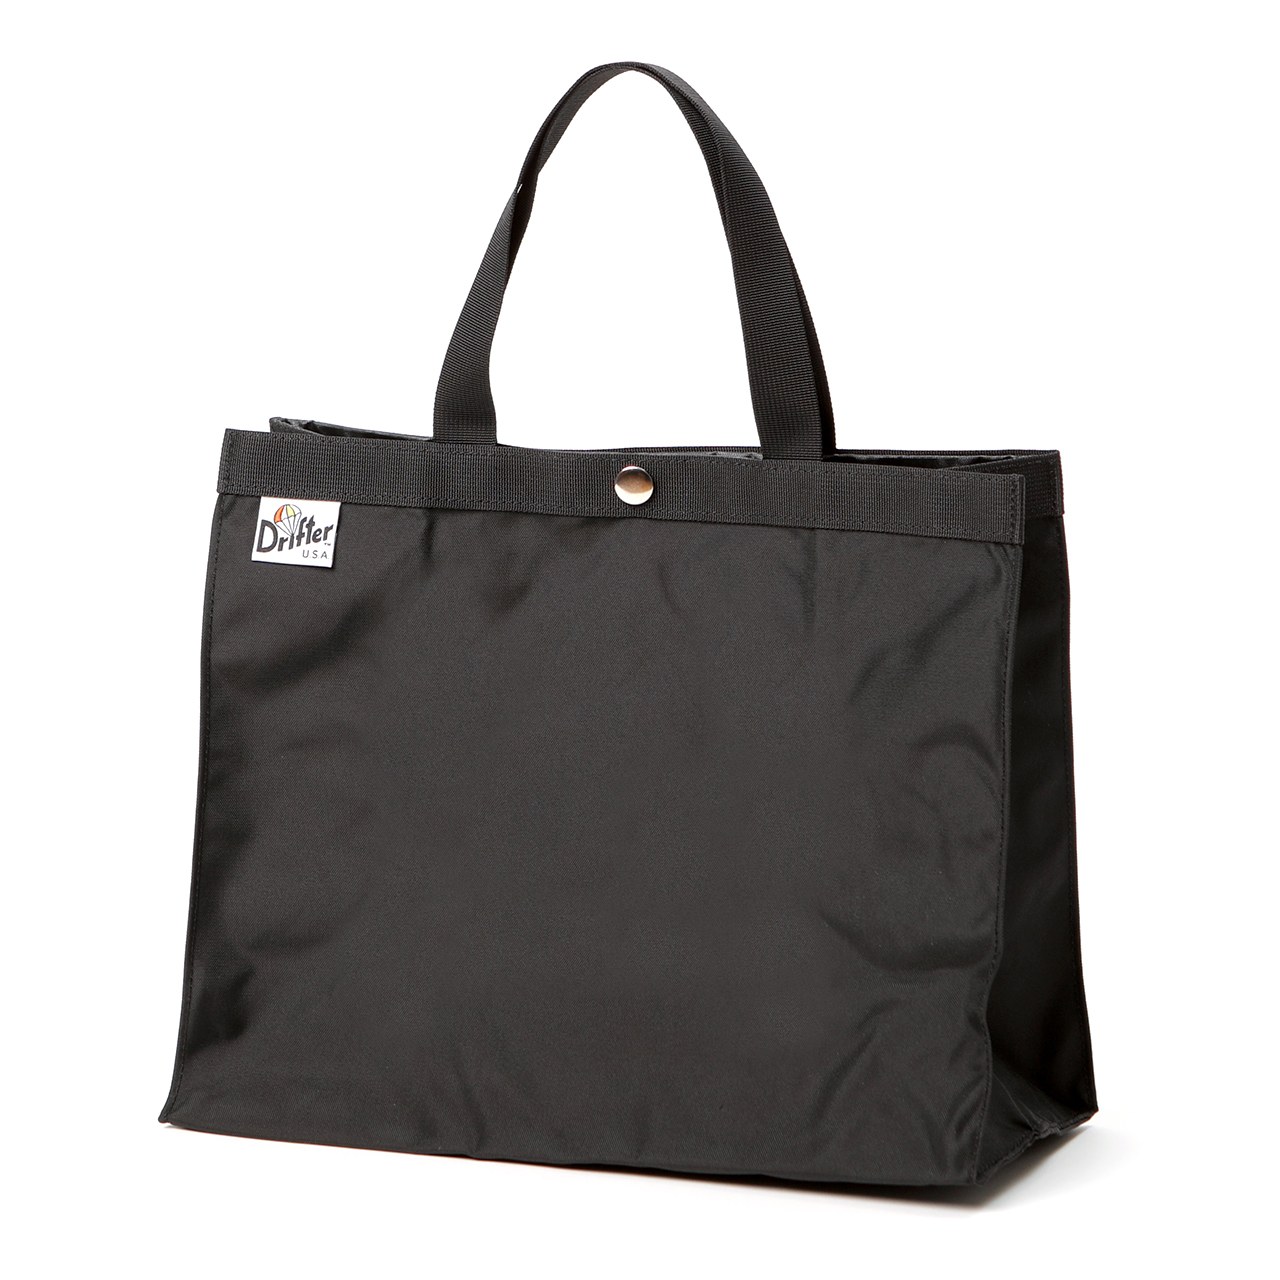 drifter-23fw-paper-bag-tote-m